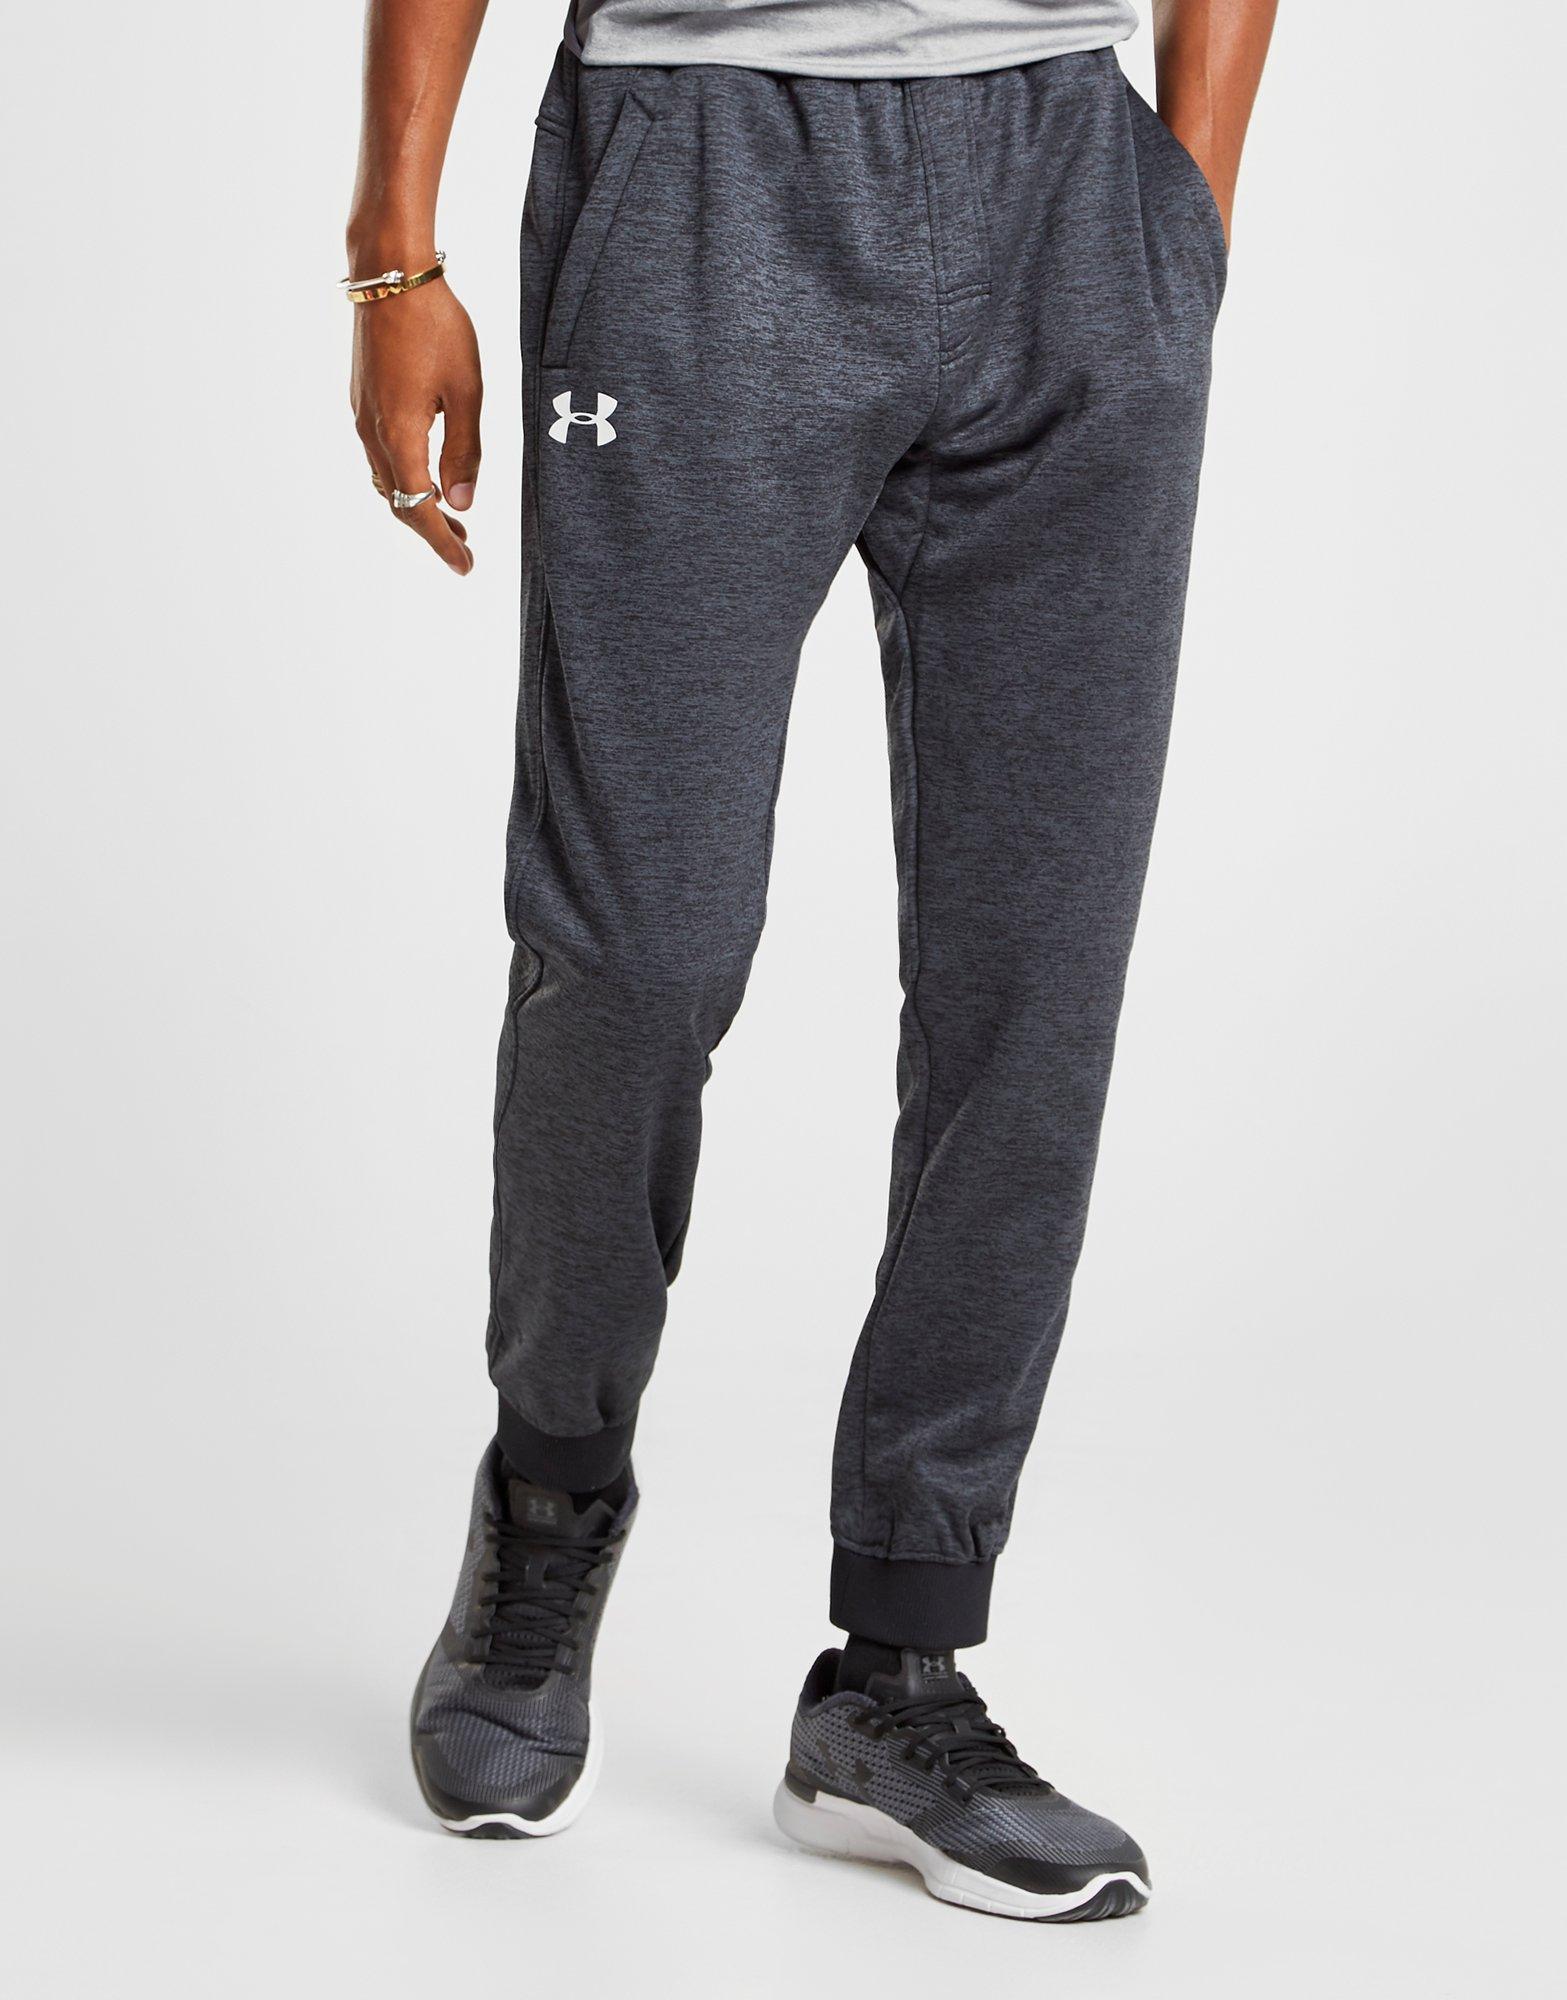 Under Armour Fleece Poly Track Pants in Grey (Gray) for Men - Lyst